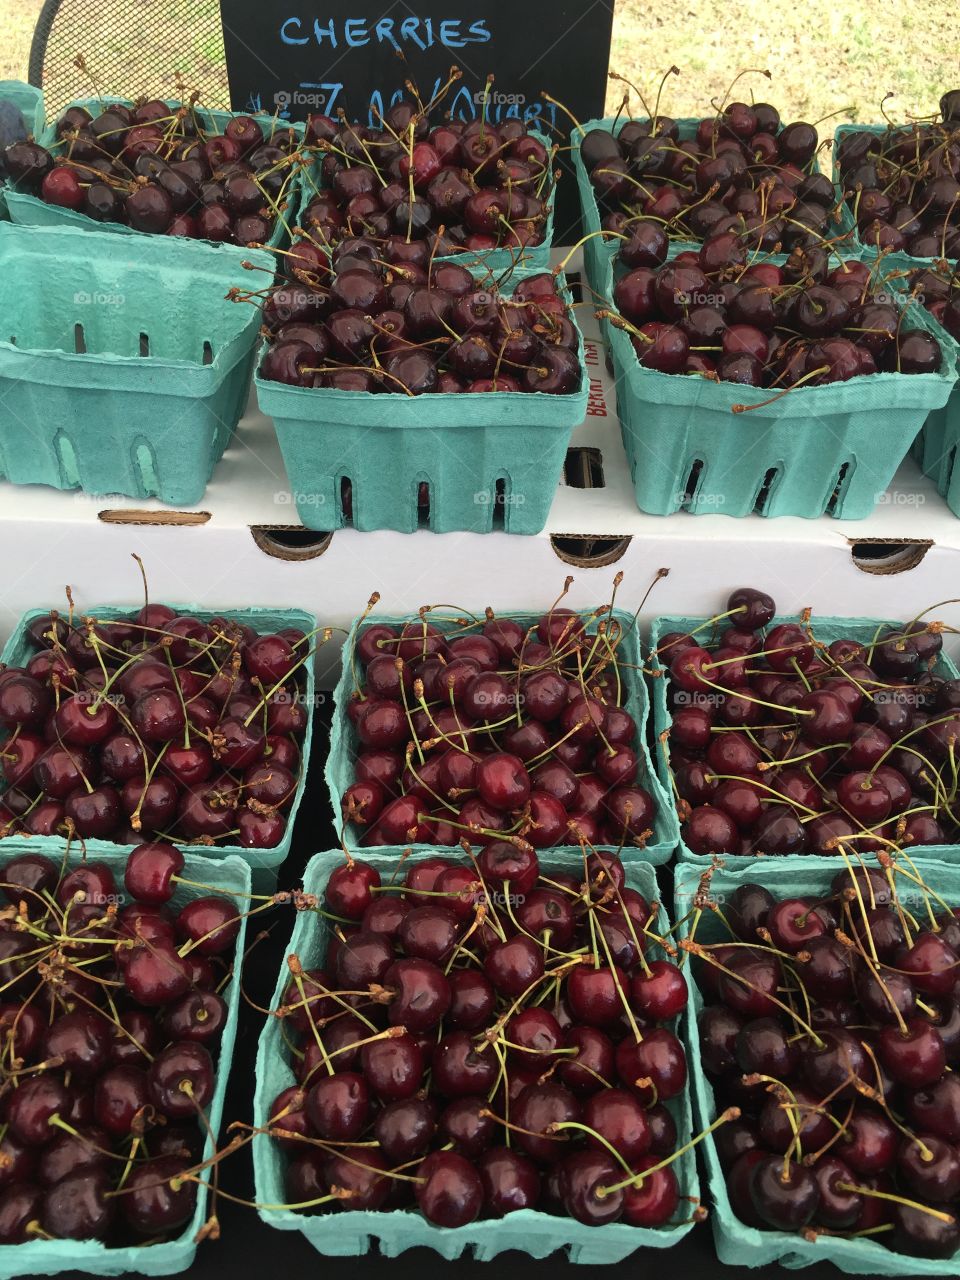 Cherries at the farmers market 